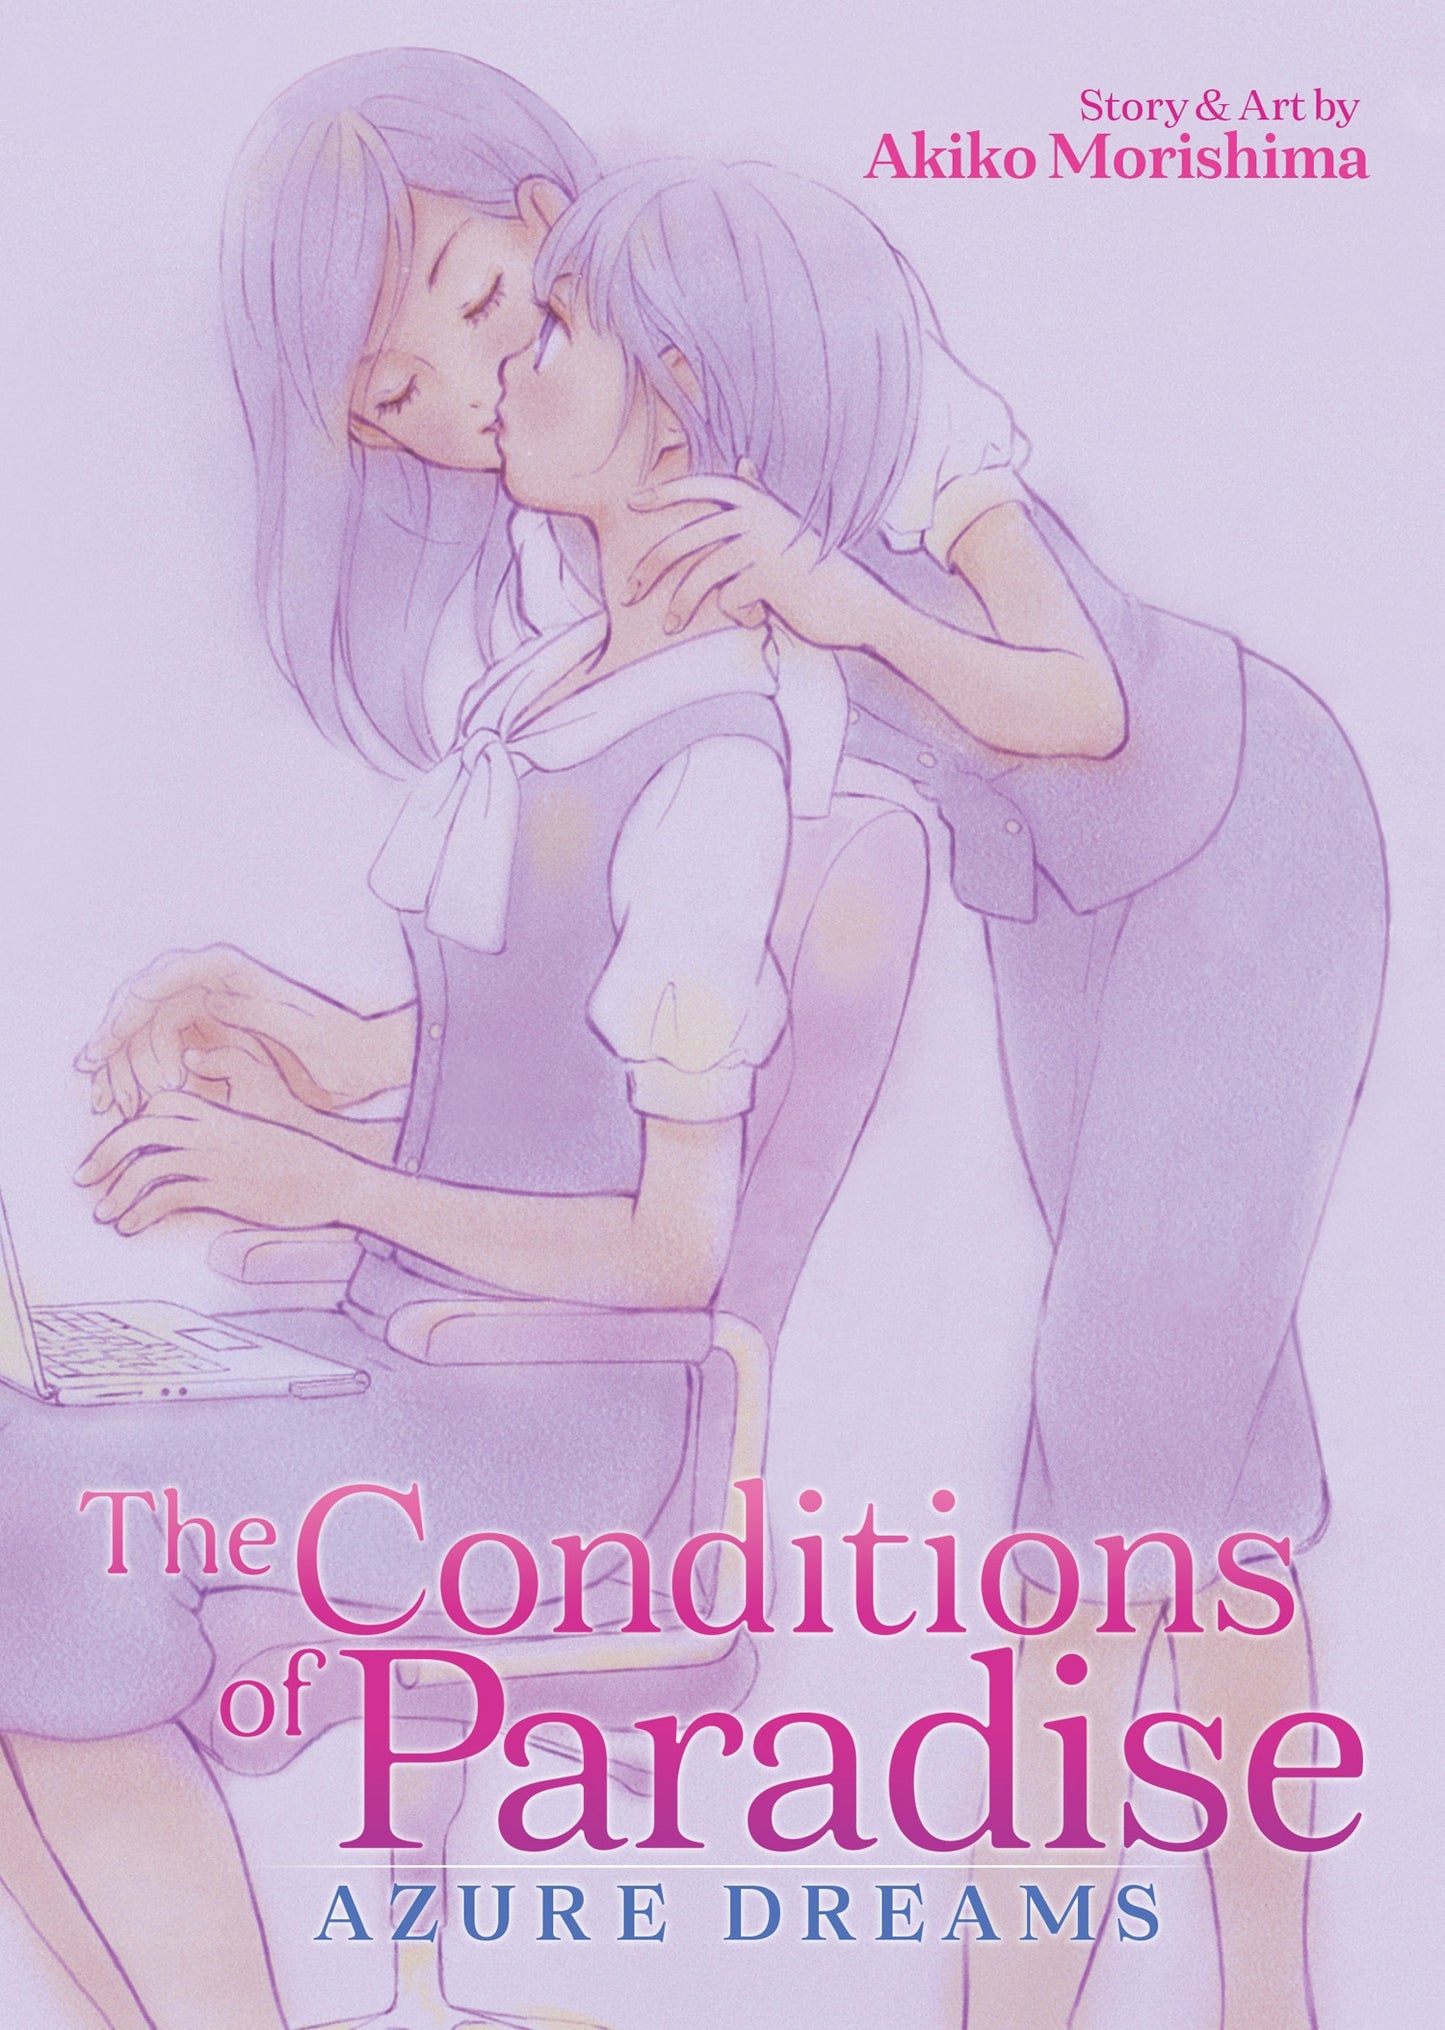 The Conditions of Paradise : Azure Dreams - Manga Warehouse